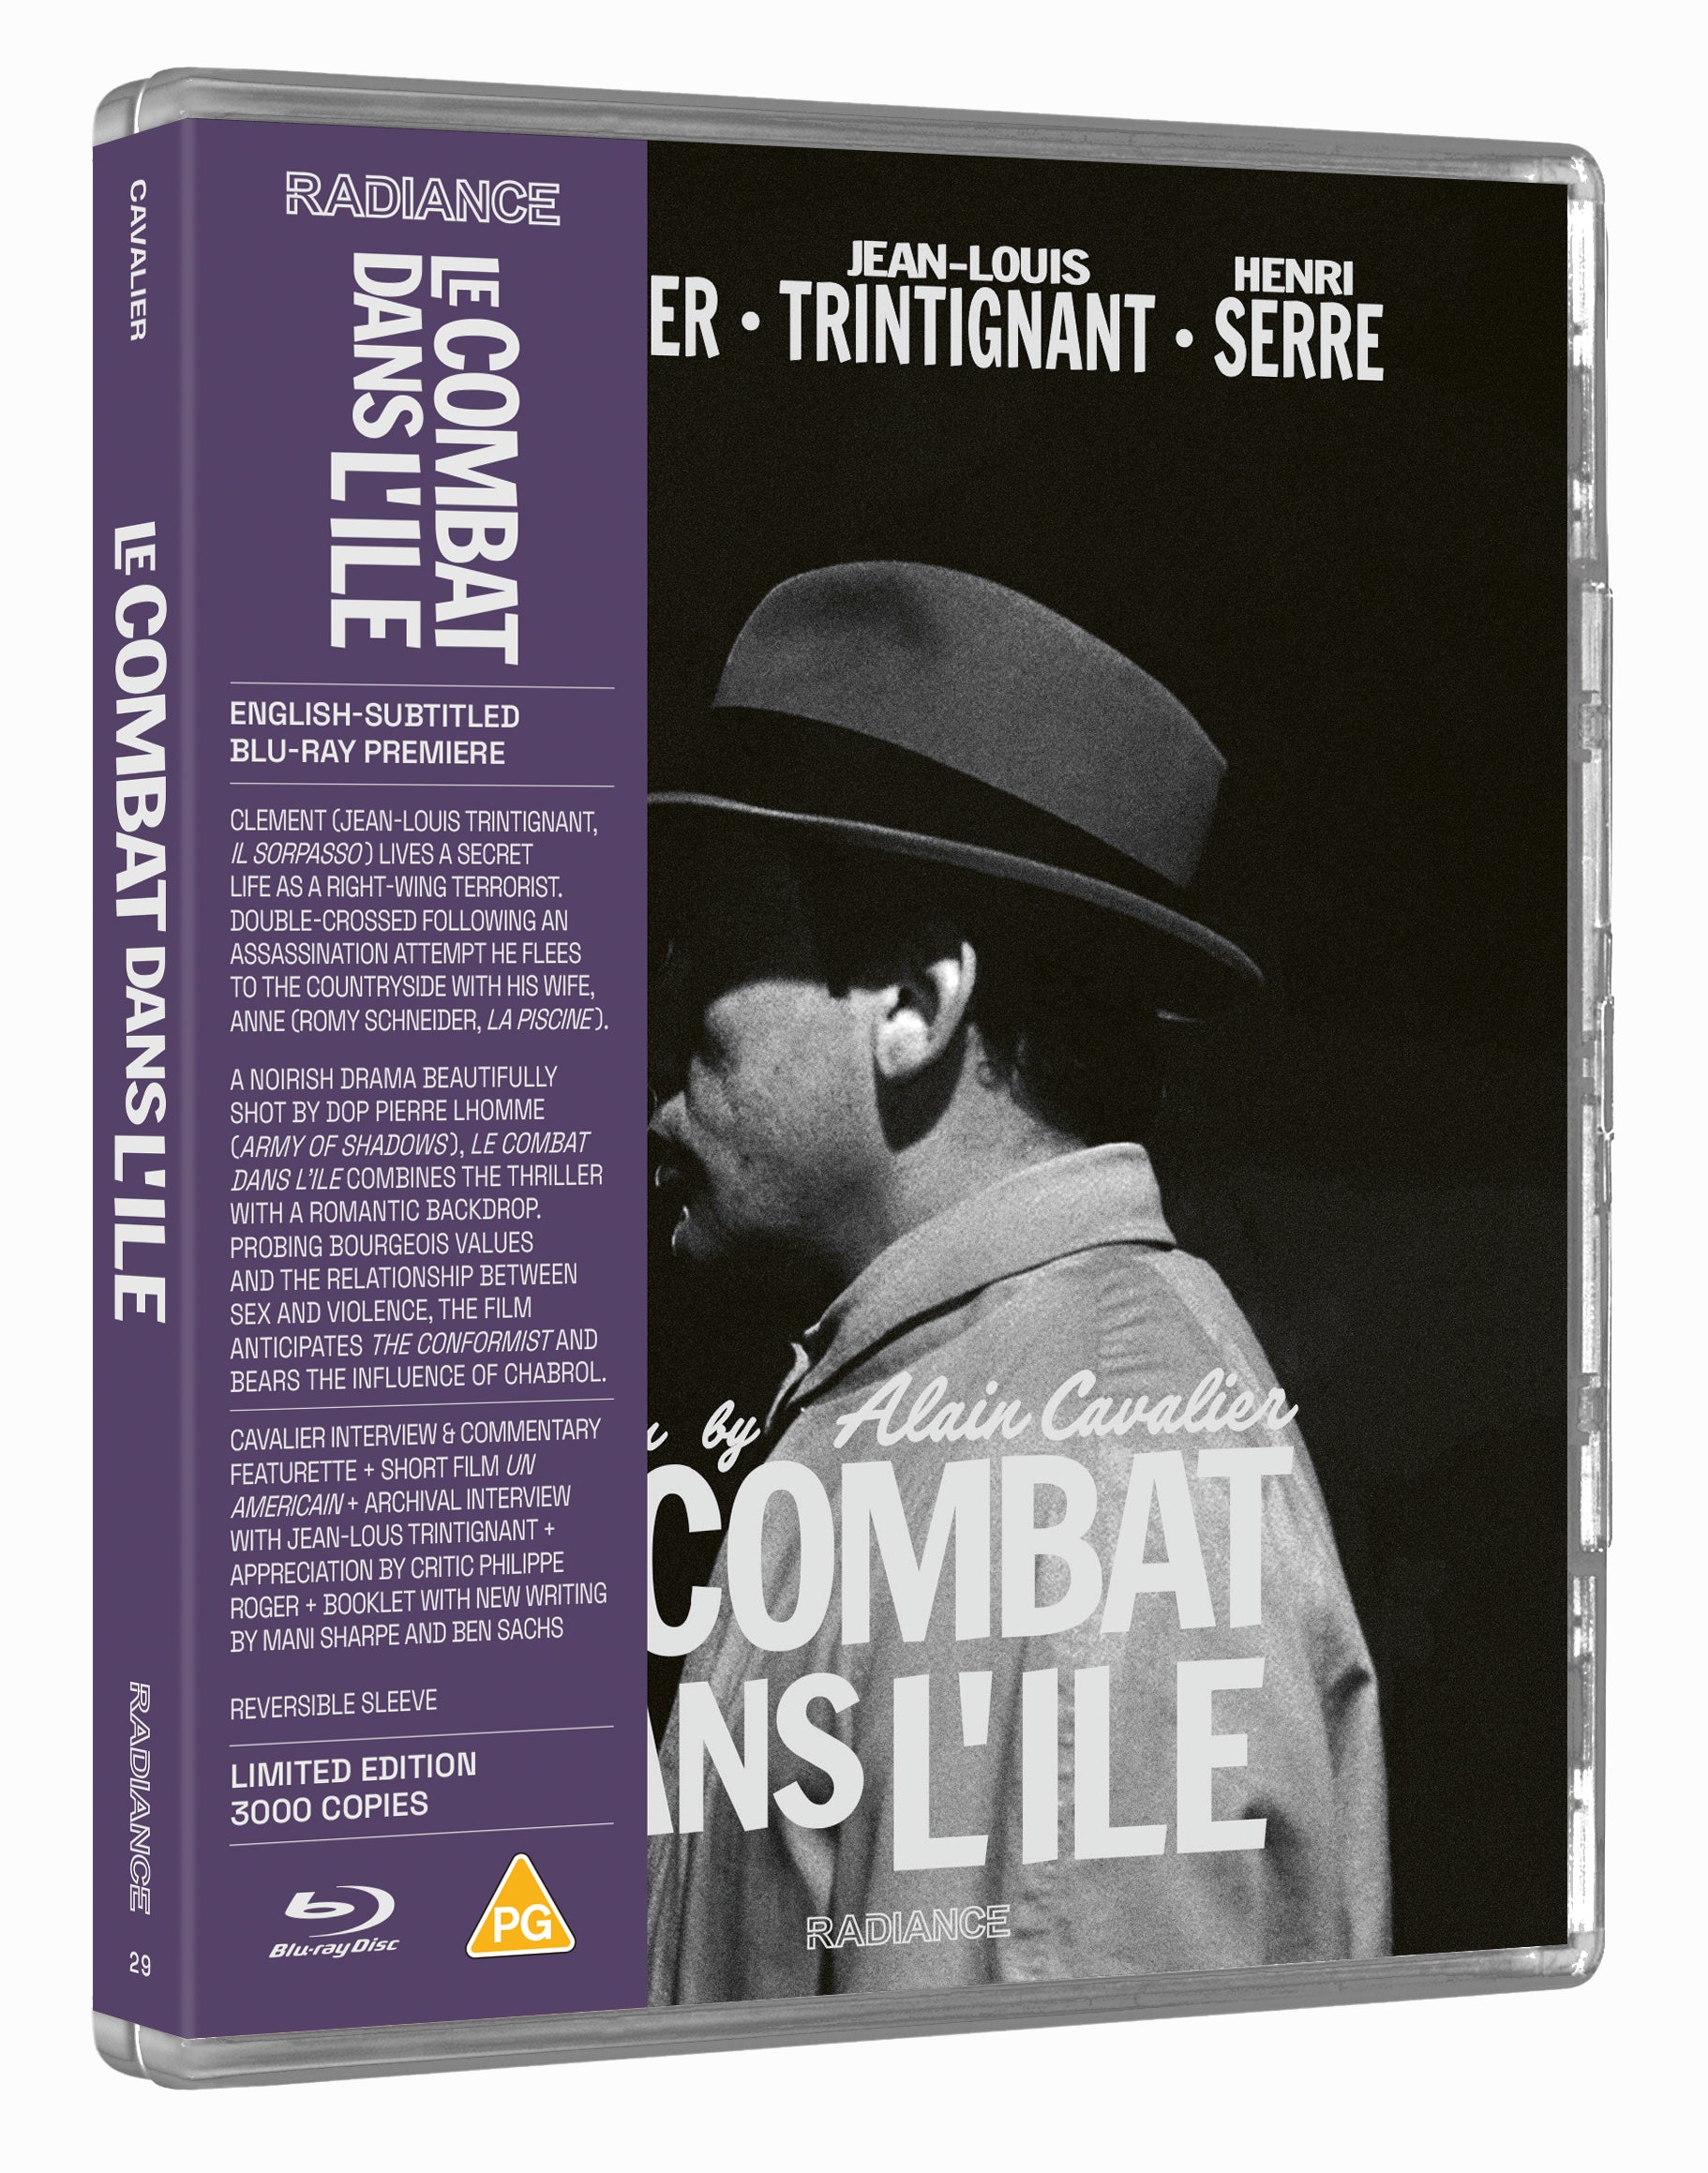 Louis+Malle+Features+Collection+-+Blu-ray+Region+B for sale online